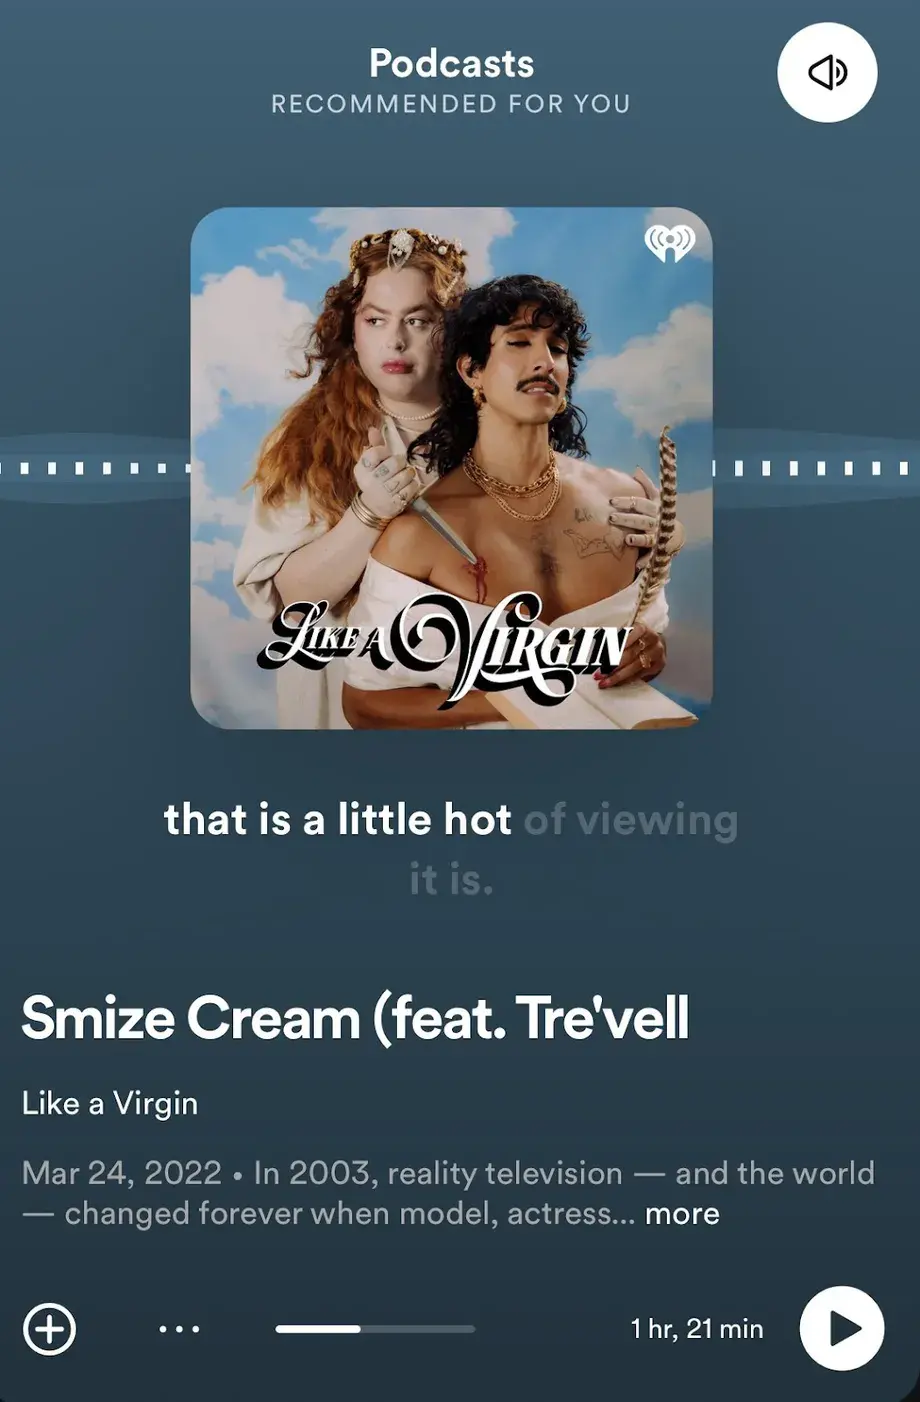 Spotify testing new visuals and TikTok-like carousel for podcast discovery